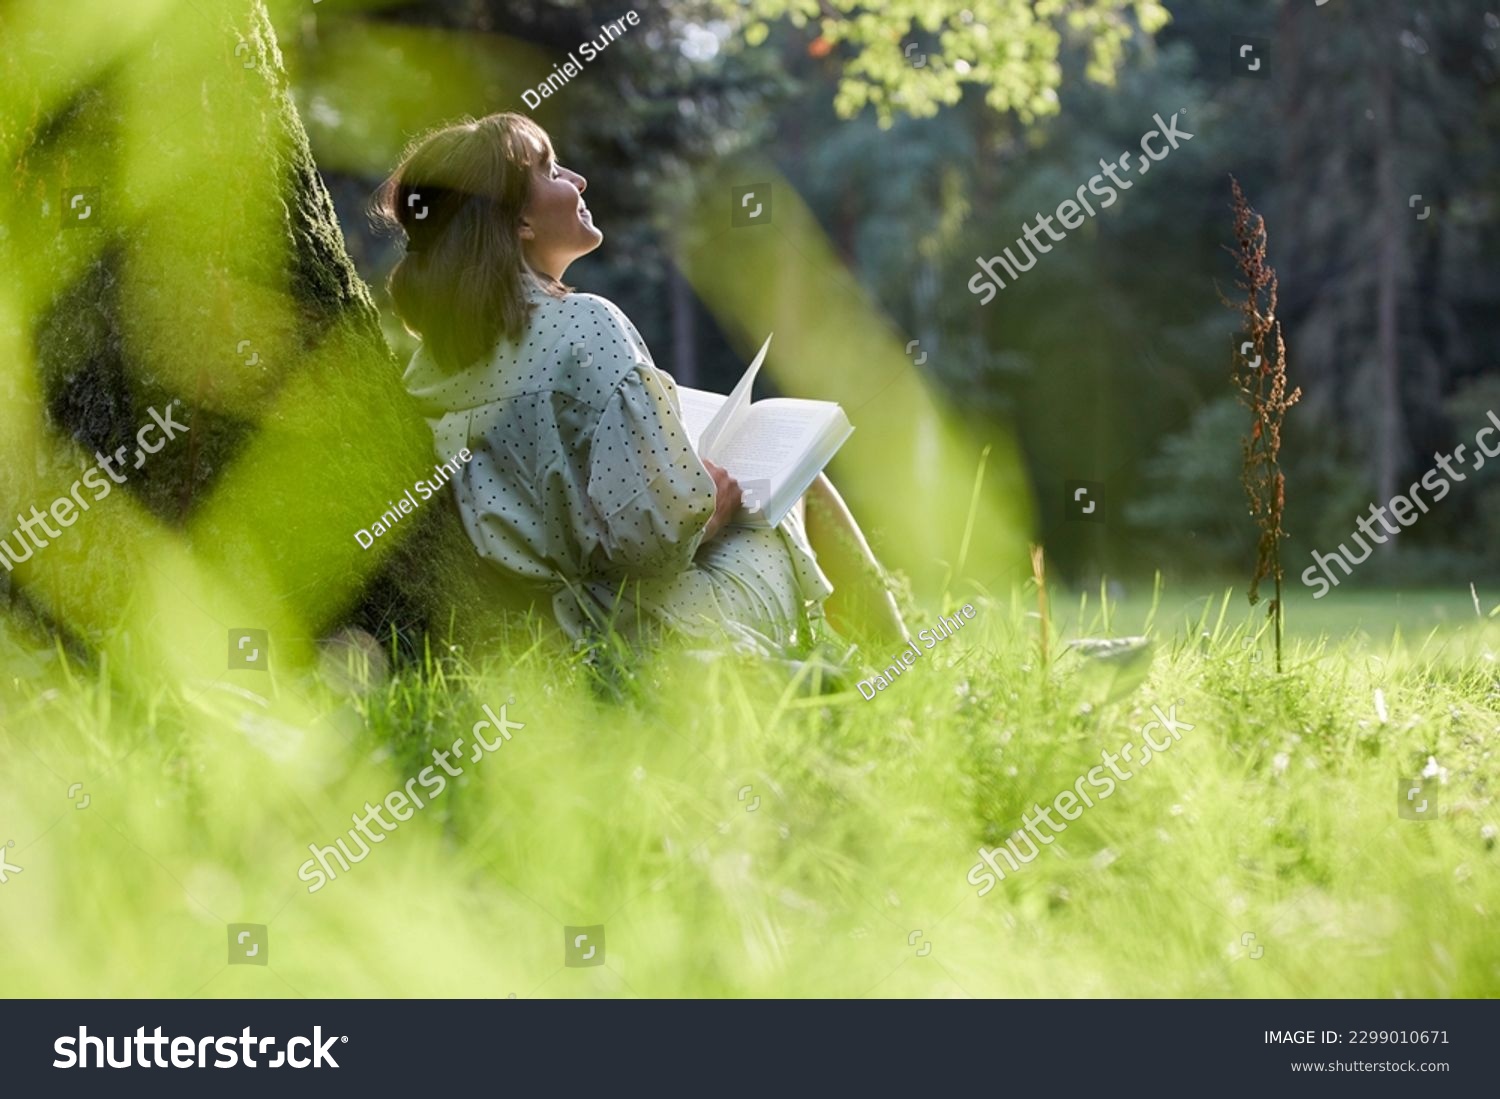 A young woman sits in a park leaning against a tree, reading a book in spring or summer, relaxed and happy, enjoying the sun. #2299010671